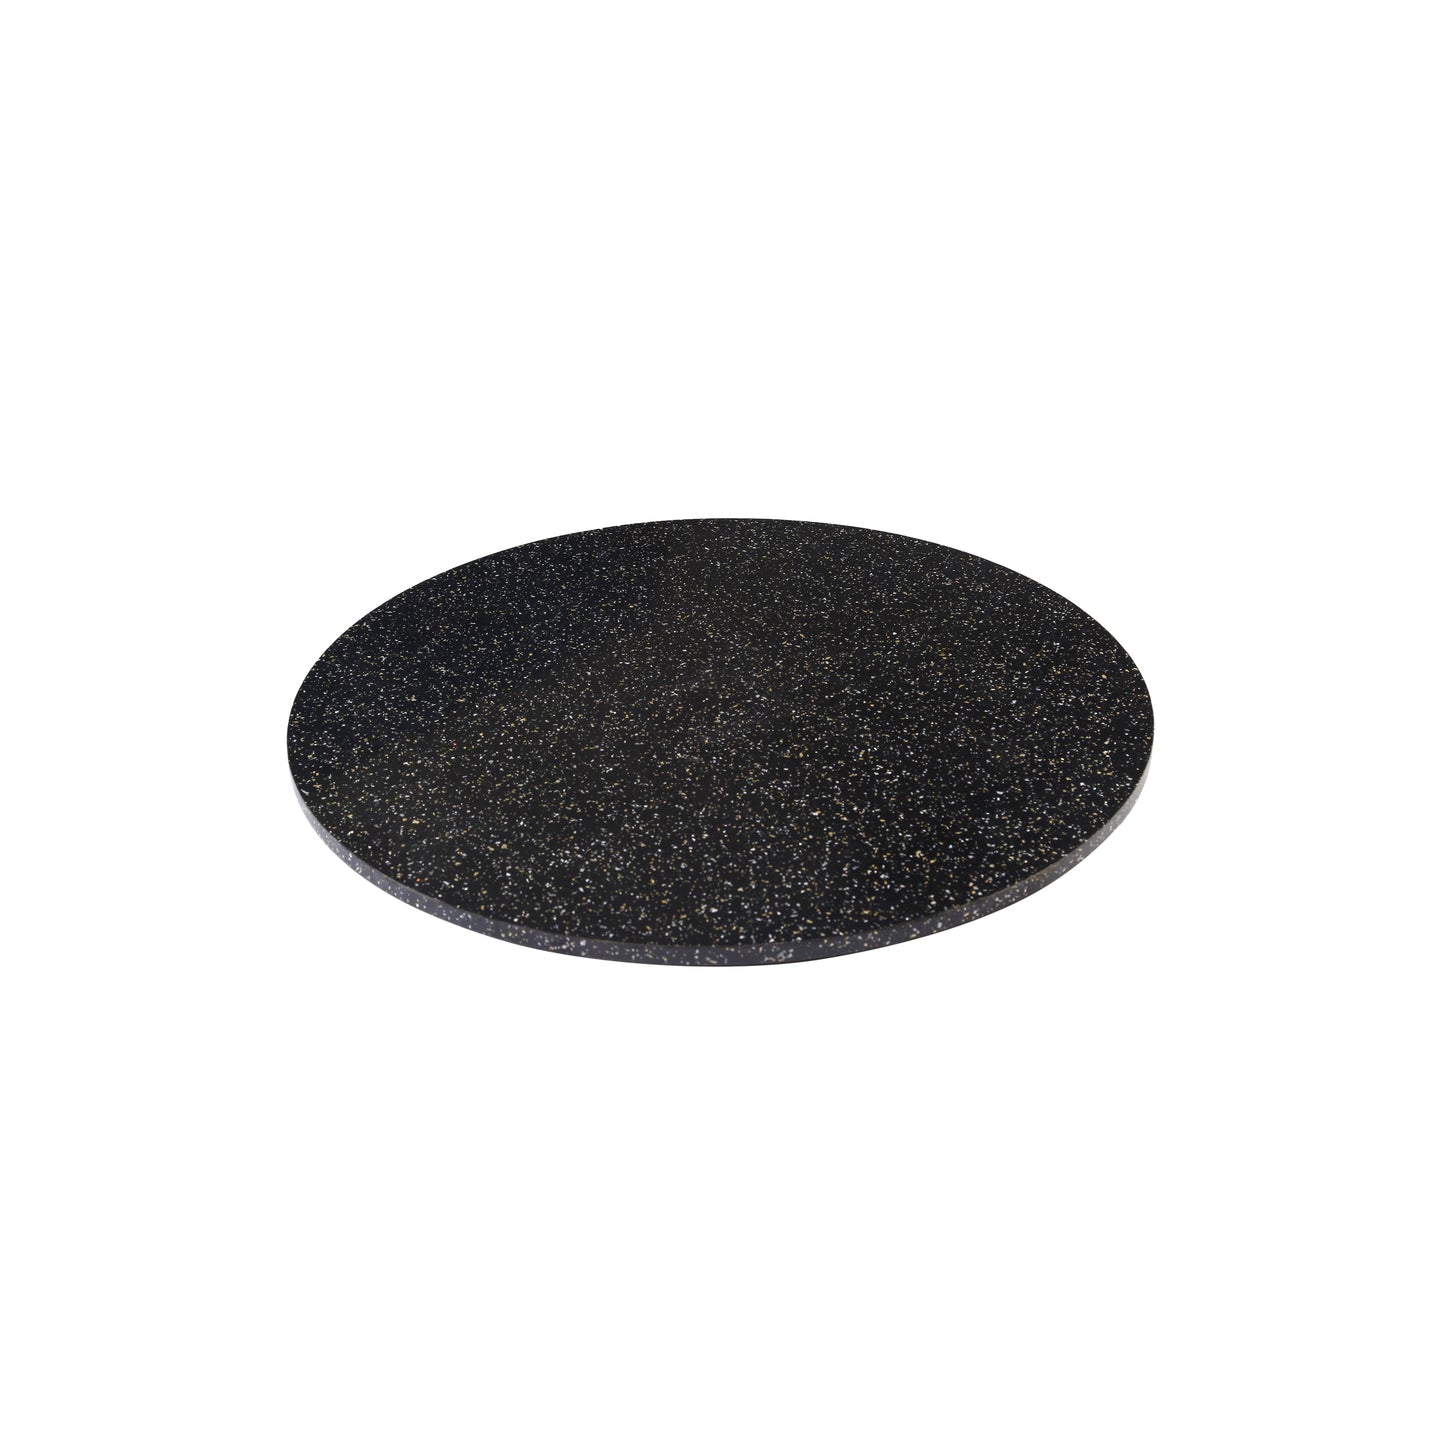 A Tiny Mistake Black Granite Wooden Table Turner, Dining Table Organisation, Lazy Susan for Dining Room Decor